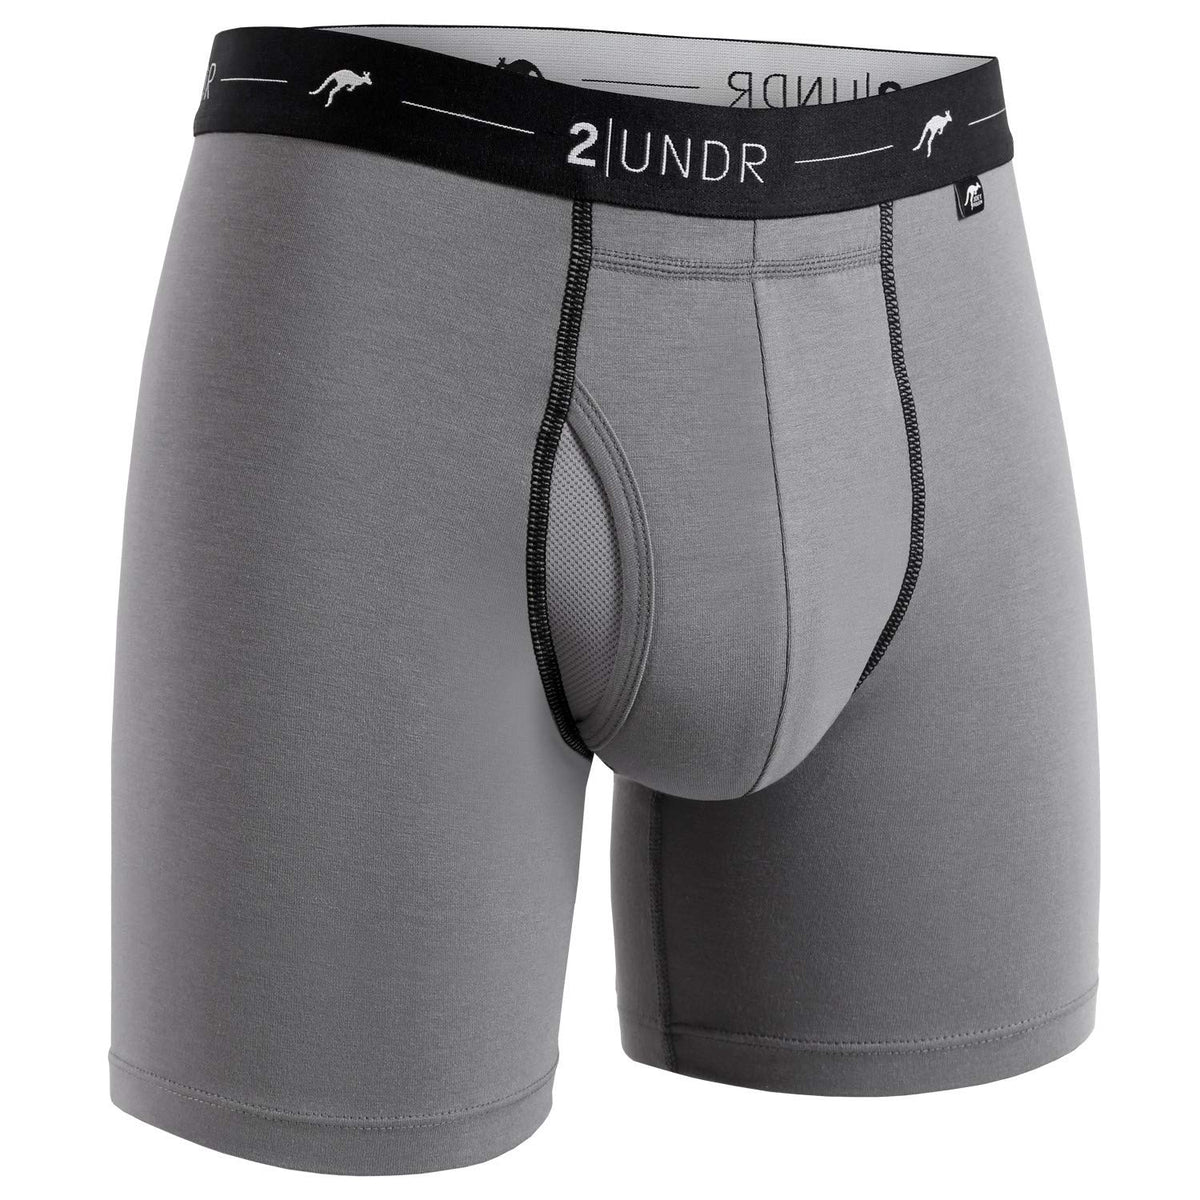 2UNDR Men's 6 Swing Shift Boxer Briefs (Grey/Blue, X-Small) at   Men's Clothing store